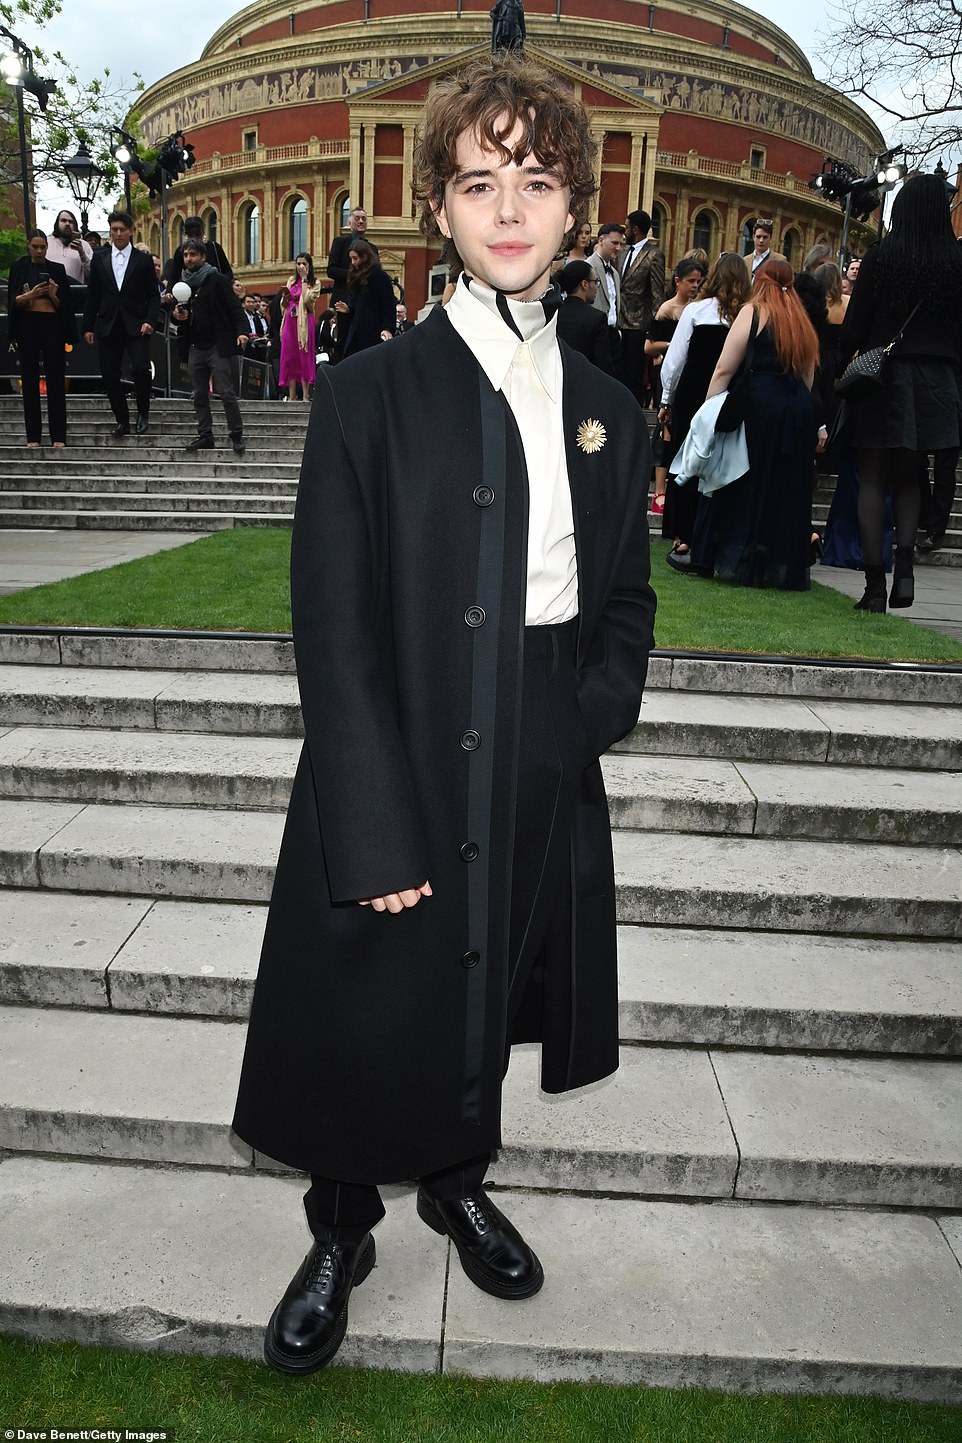 Jack Wolfe, who is up for Best Actor in a supporting role in a musical for Next to Normal, looked fashion forward in a black coat, collared shirt and satin neckerchief